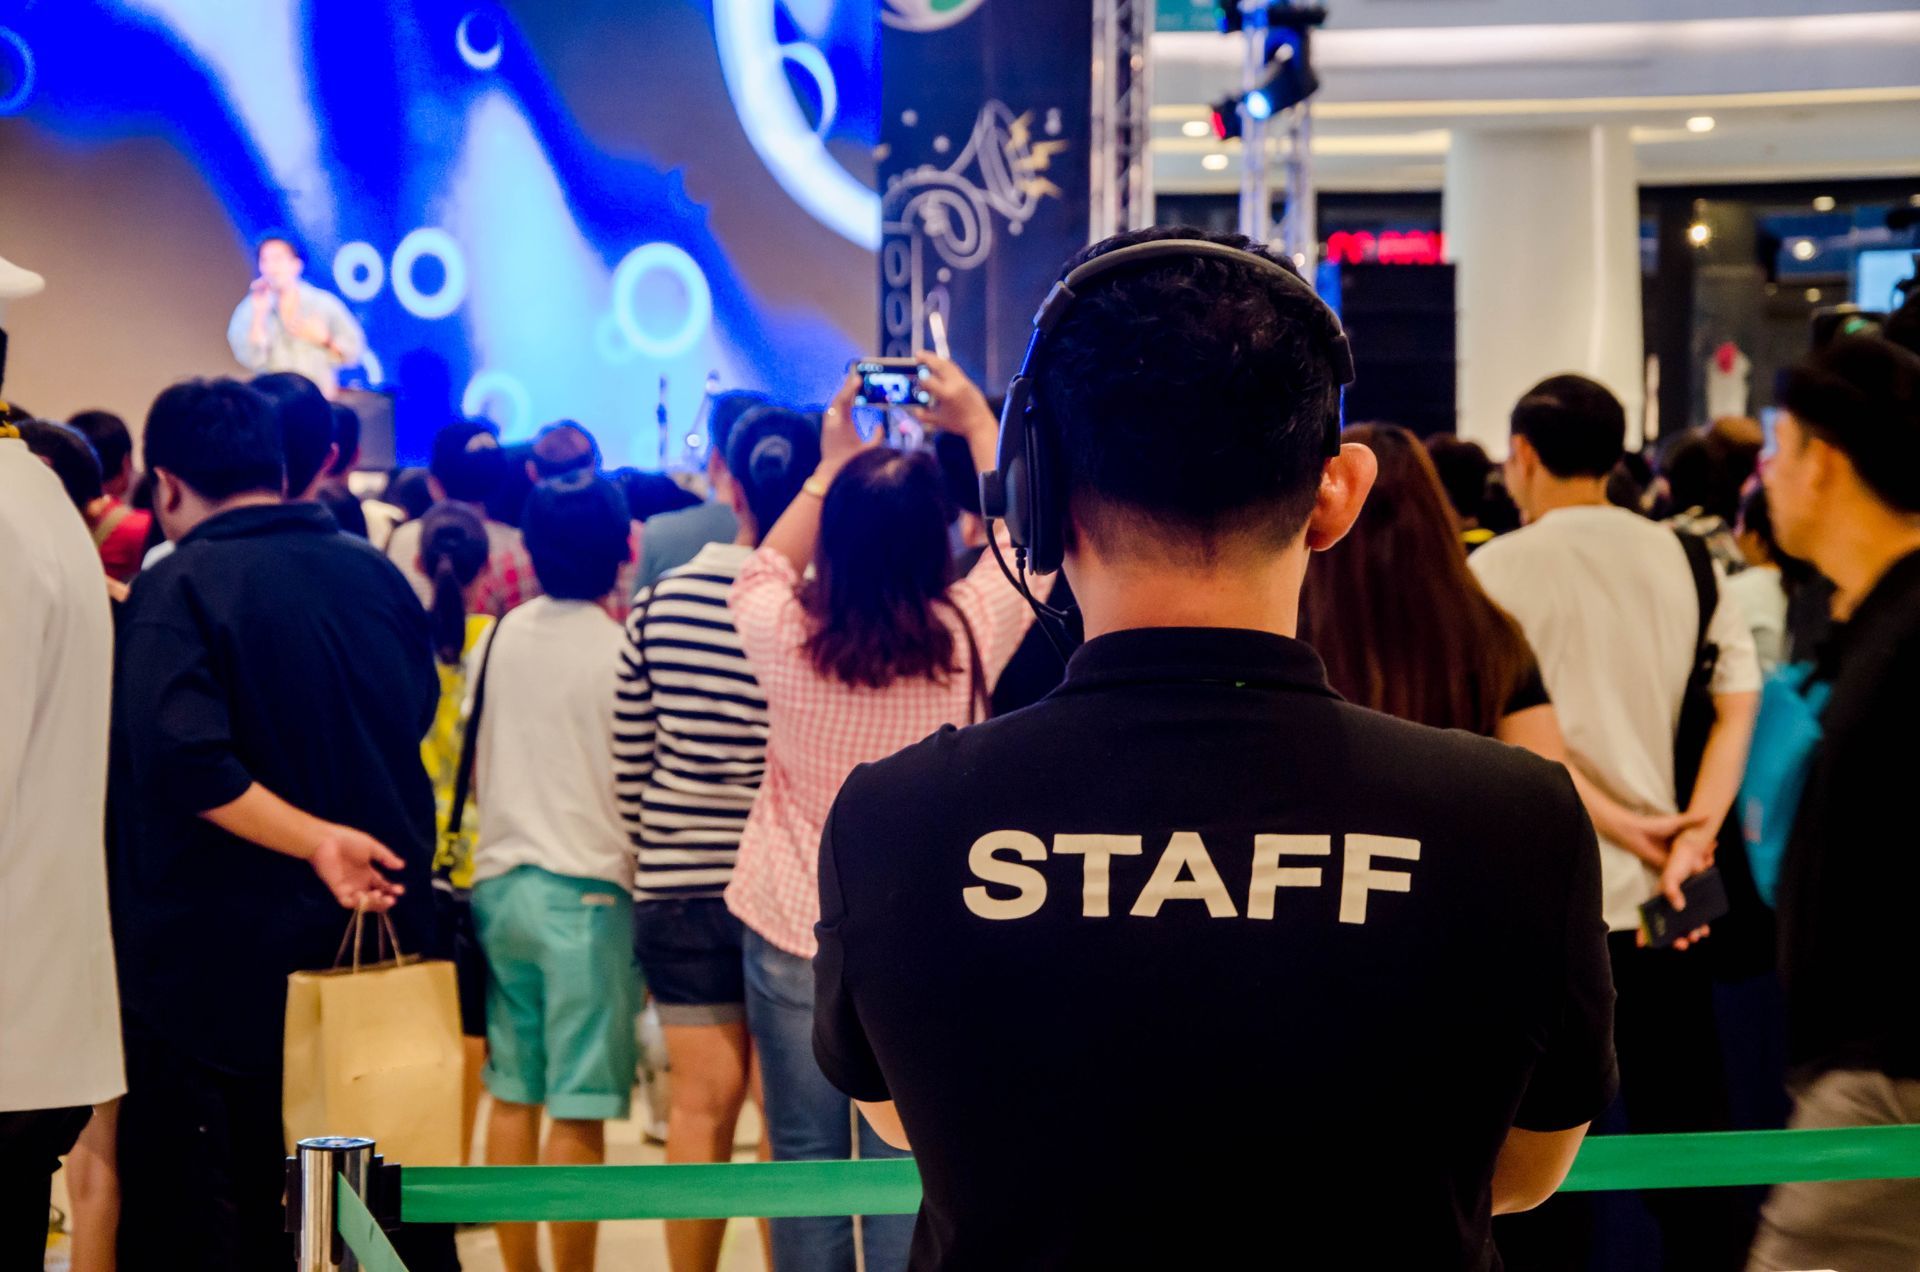 Staff of a Live Event